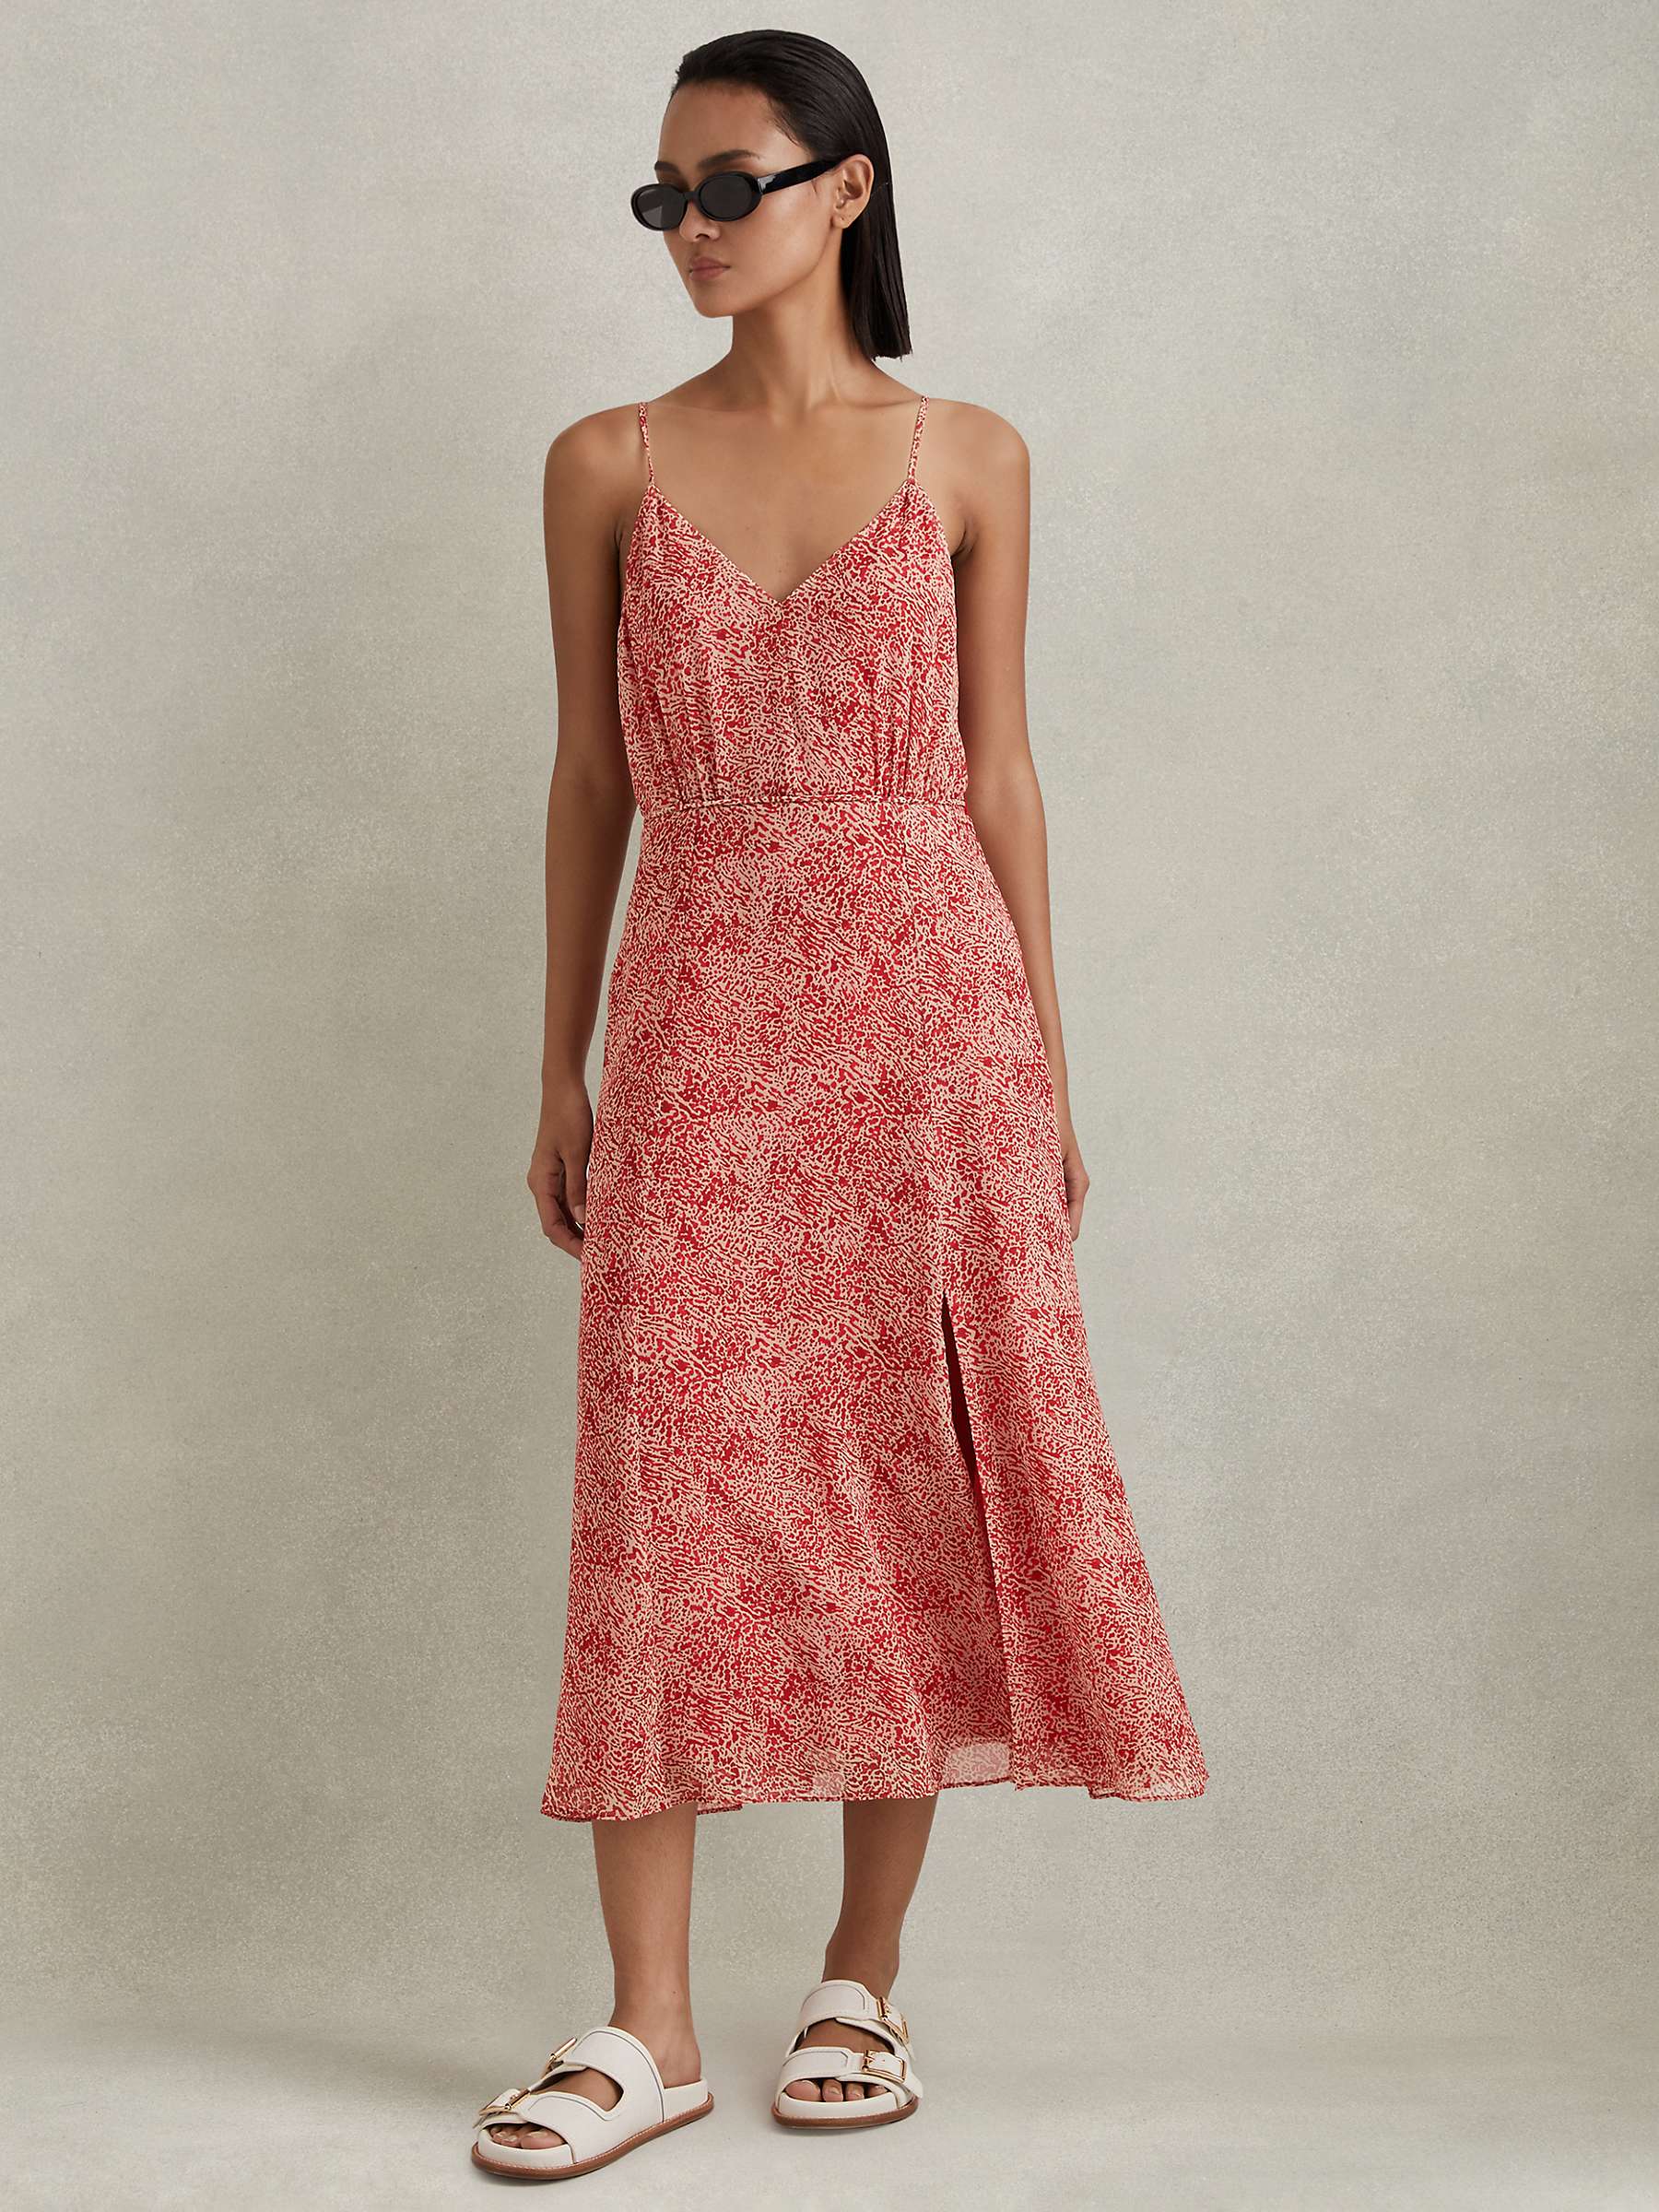 Buy Reiss Petite Olivia Abstract Print Strappy Midi Dress, Red/Nude Online at johnlewis.com